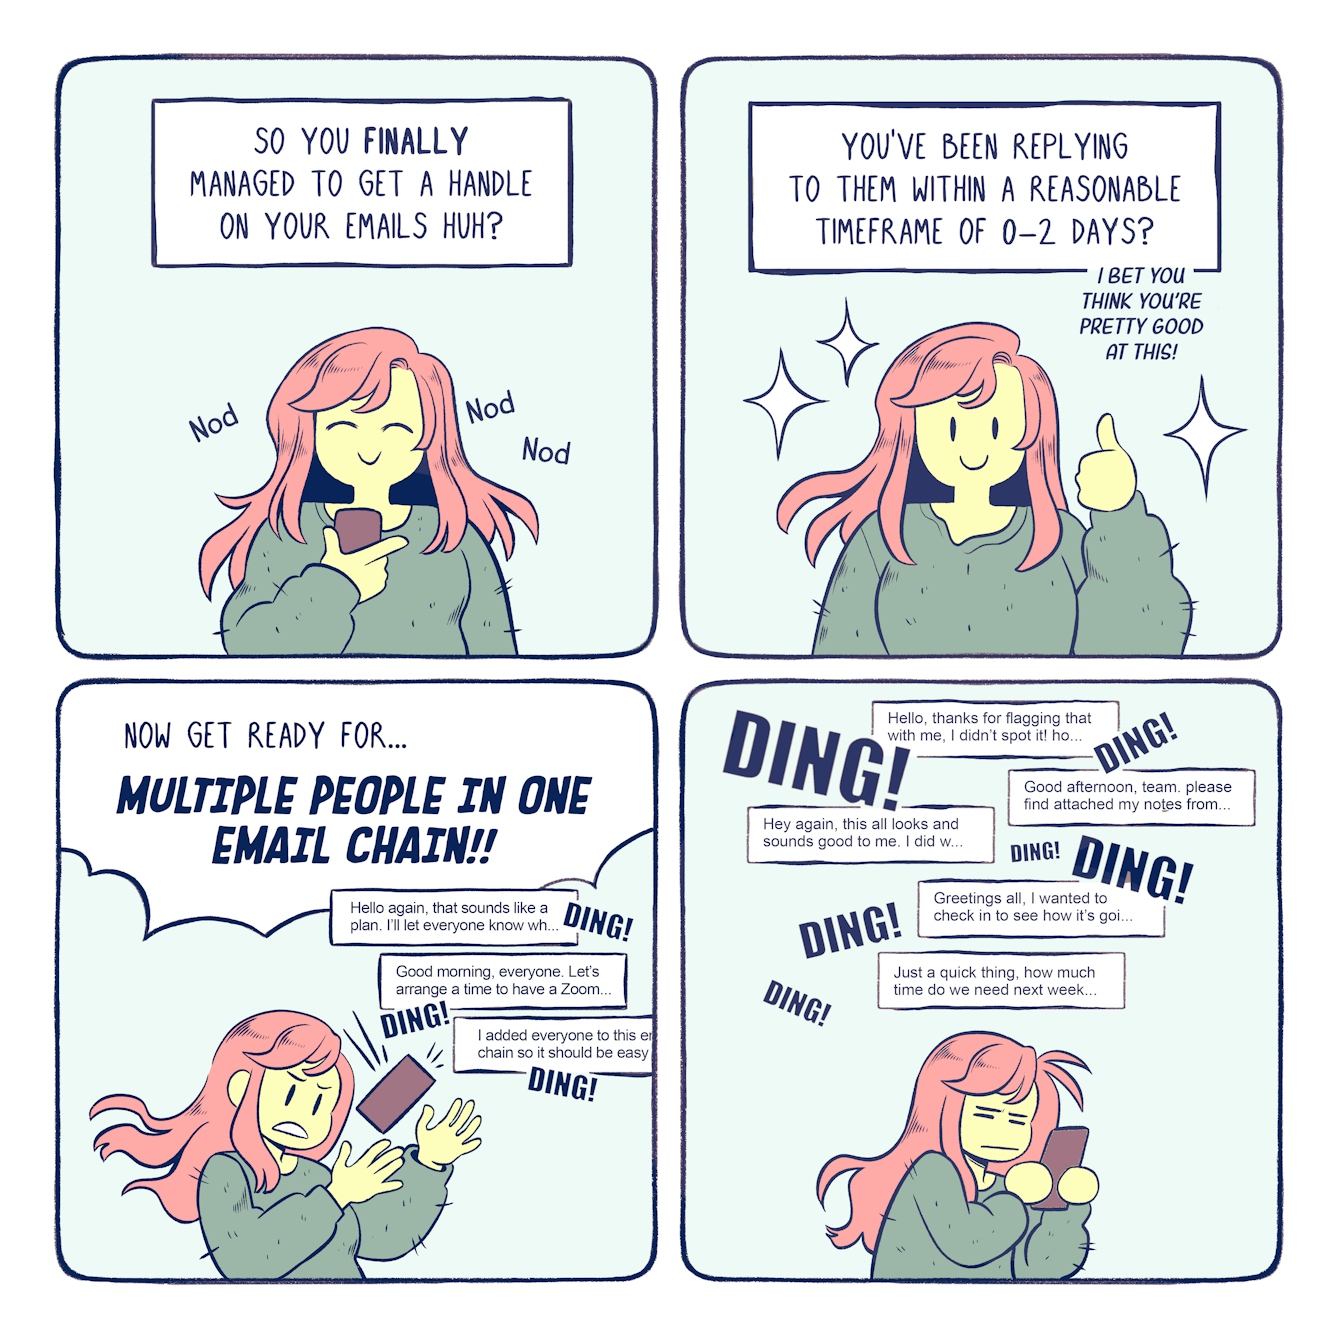 A colourful four panel comic about emails and overwhelm. In the first panel, a narrator talks to the main character. The narrator says, 'So you finally managed to get a handle on your emails, huh?' The main character, Bex, nods excitedly.

In the second panel, the narrator continues, 'You've been replying to them within a reasonable timeframe of 0-2 days? I bet you think you're pretty good at this!' Bex responds with a confident thumbs up, glowing with the satisfaction of her achievements.

In the third panel, Bex's phone starts blowing up with multiple emails. The phone dings obnoxiously as she struggles to keep hold of it, unnerved and taken aback by the sudden interruption.  The narrator continues, 'Now get ready for multiple people in one email chain!'

In the final panel, the phone keeps dinging and multiple messages come pouring in. Bex looks exhausted and dejected while she reads the emails, realising that she's going to struggle to keep up with this new pace.